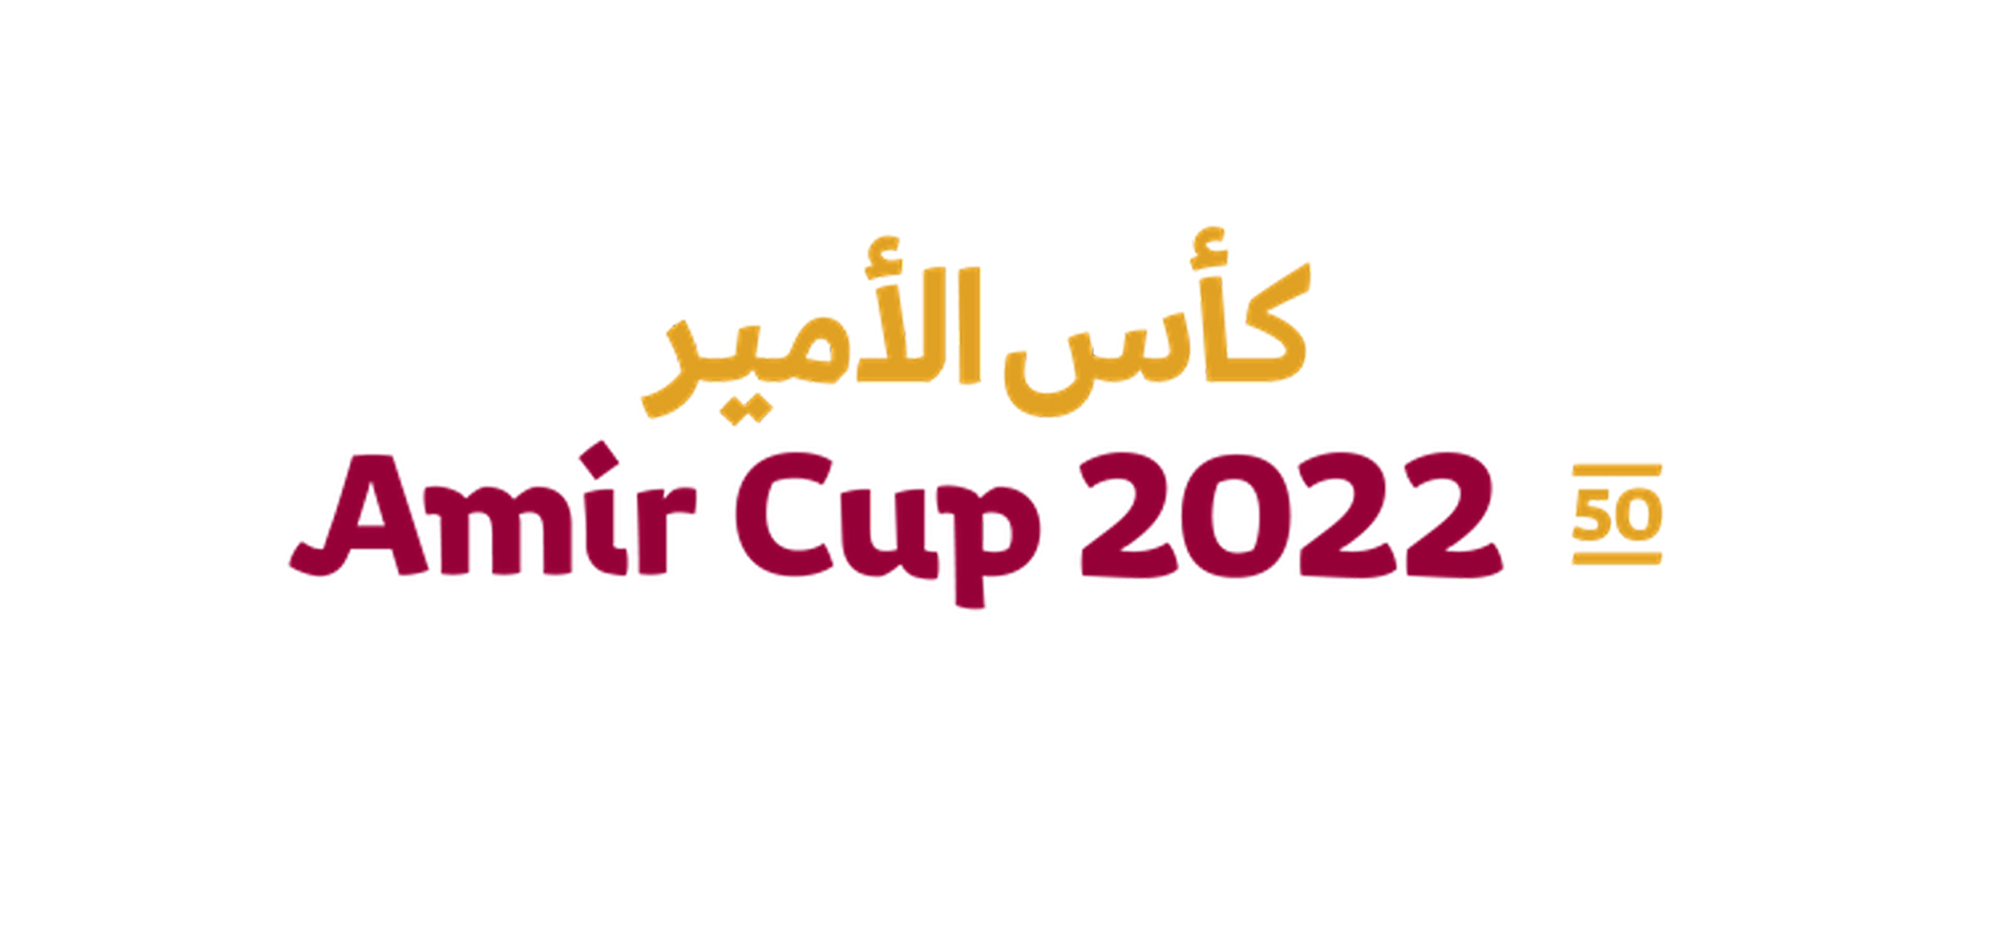 Amir Cup: Round of 16 to kick off on February 13